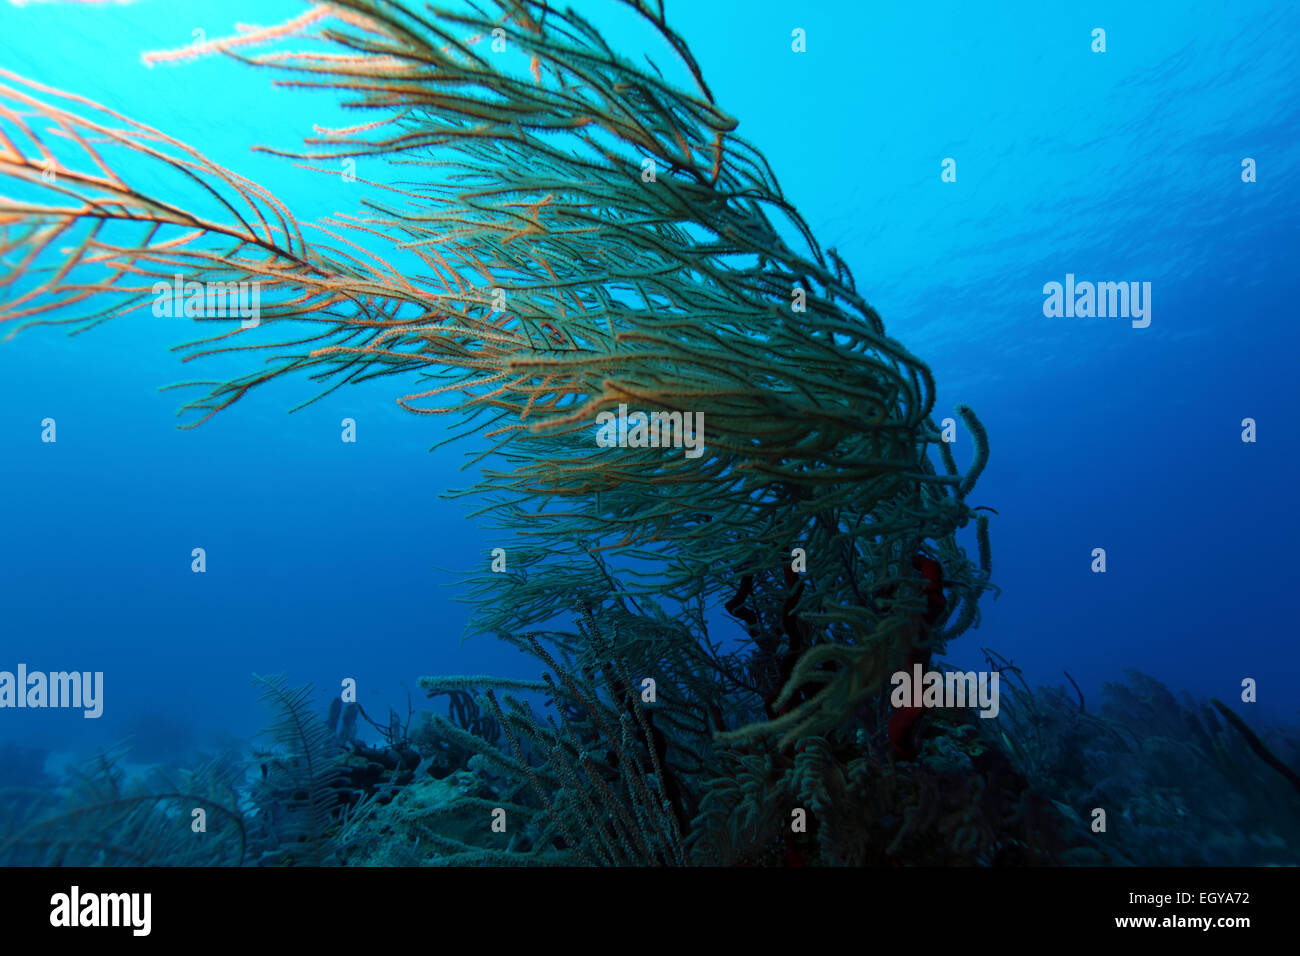 Colorful Underwater Coral Landscape of Caribbean Sea Stock Photo